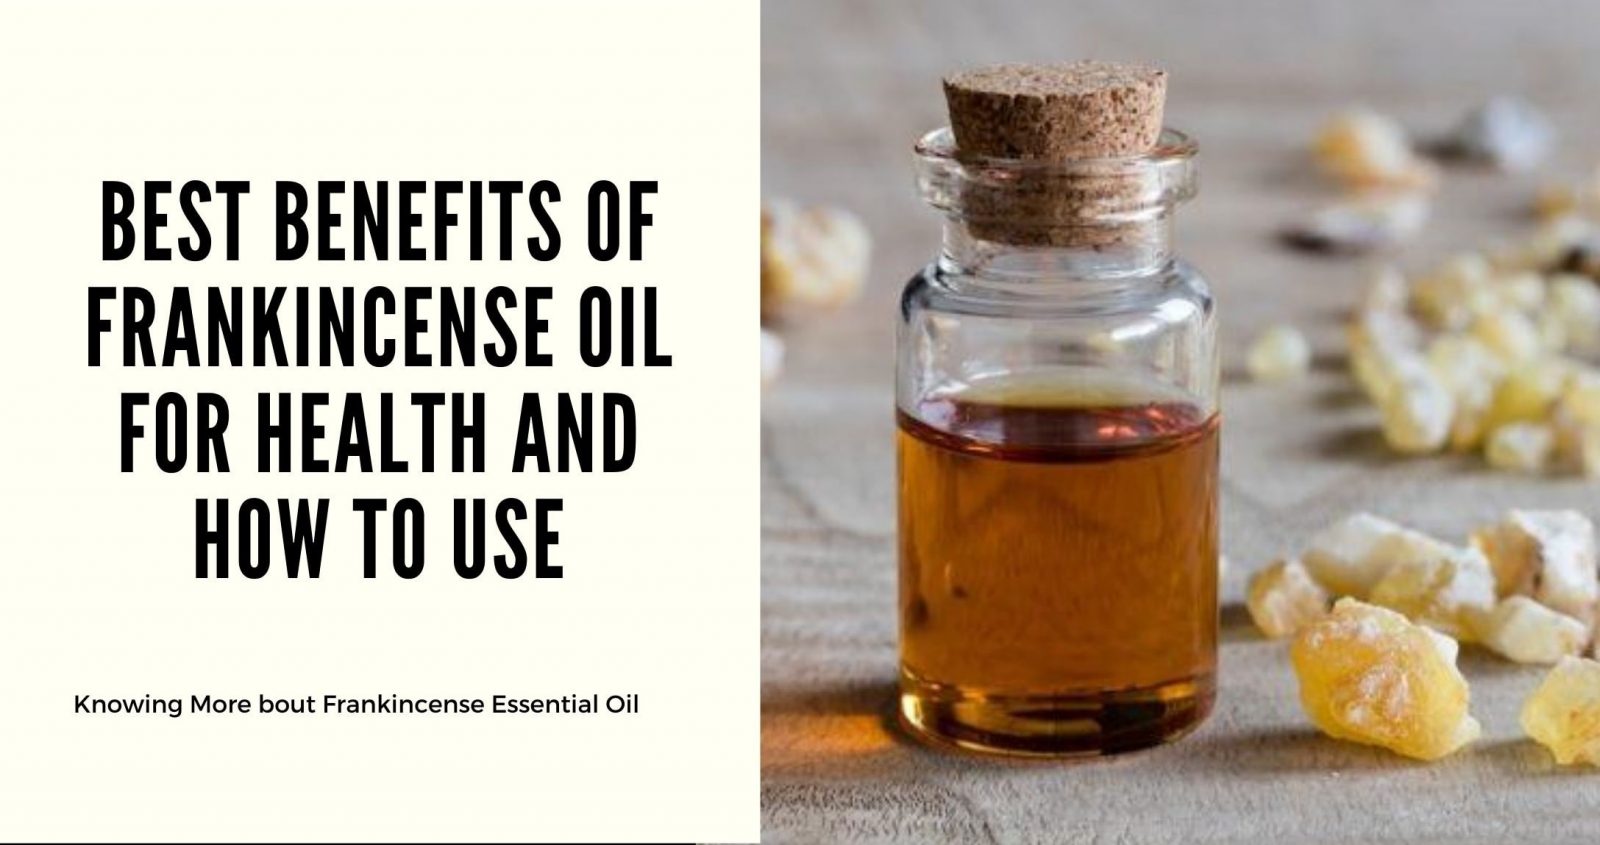 Best Benefits of Frankincense Oil for Health and How to Use